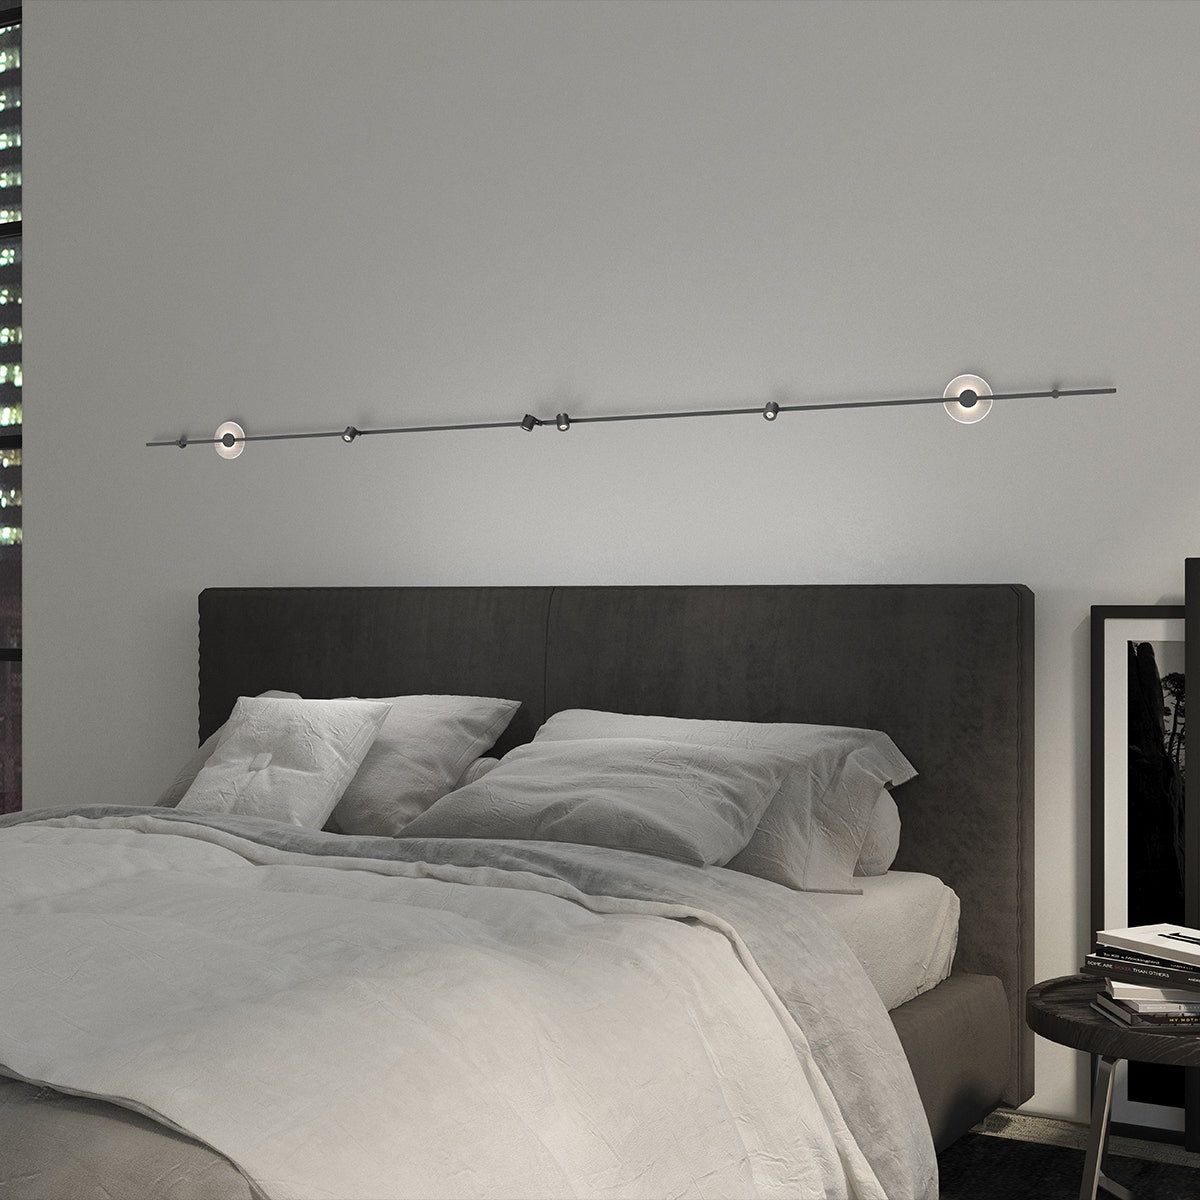 Suspenders 72" 2-Bar Linear Wall-Mounted with Mezzaluna Luminaires + Precise Bar-Mounted Aimable Cylinders